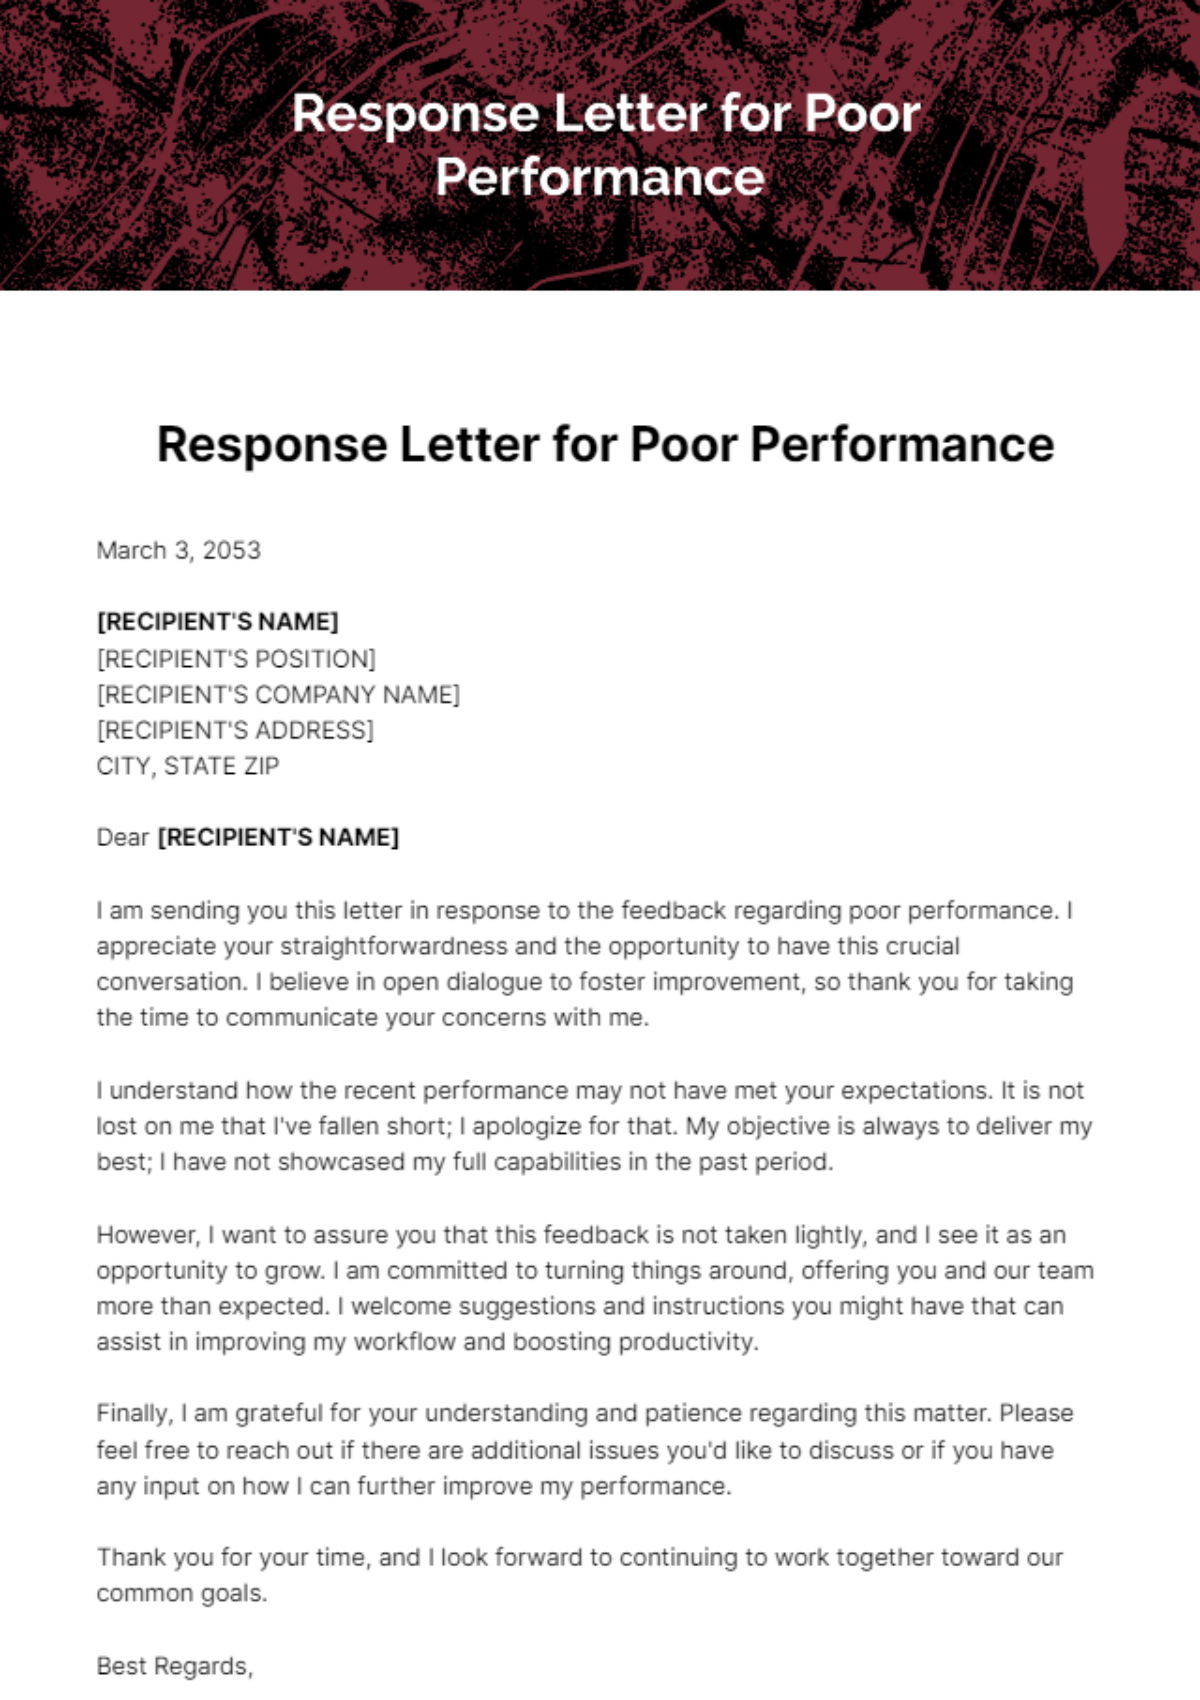 Response Letter for Poor Performance Template